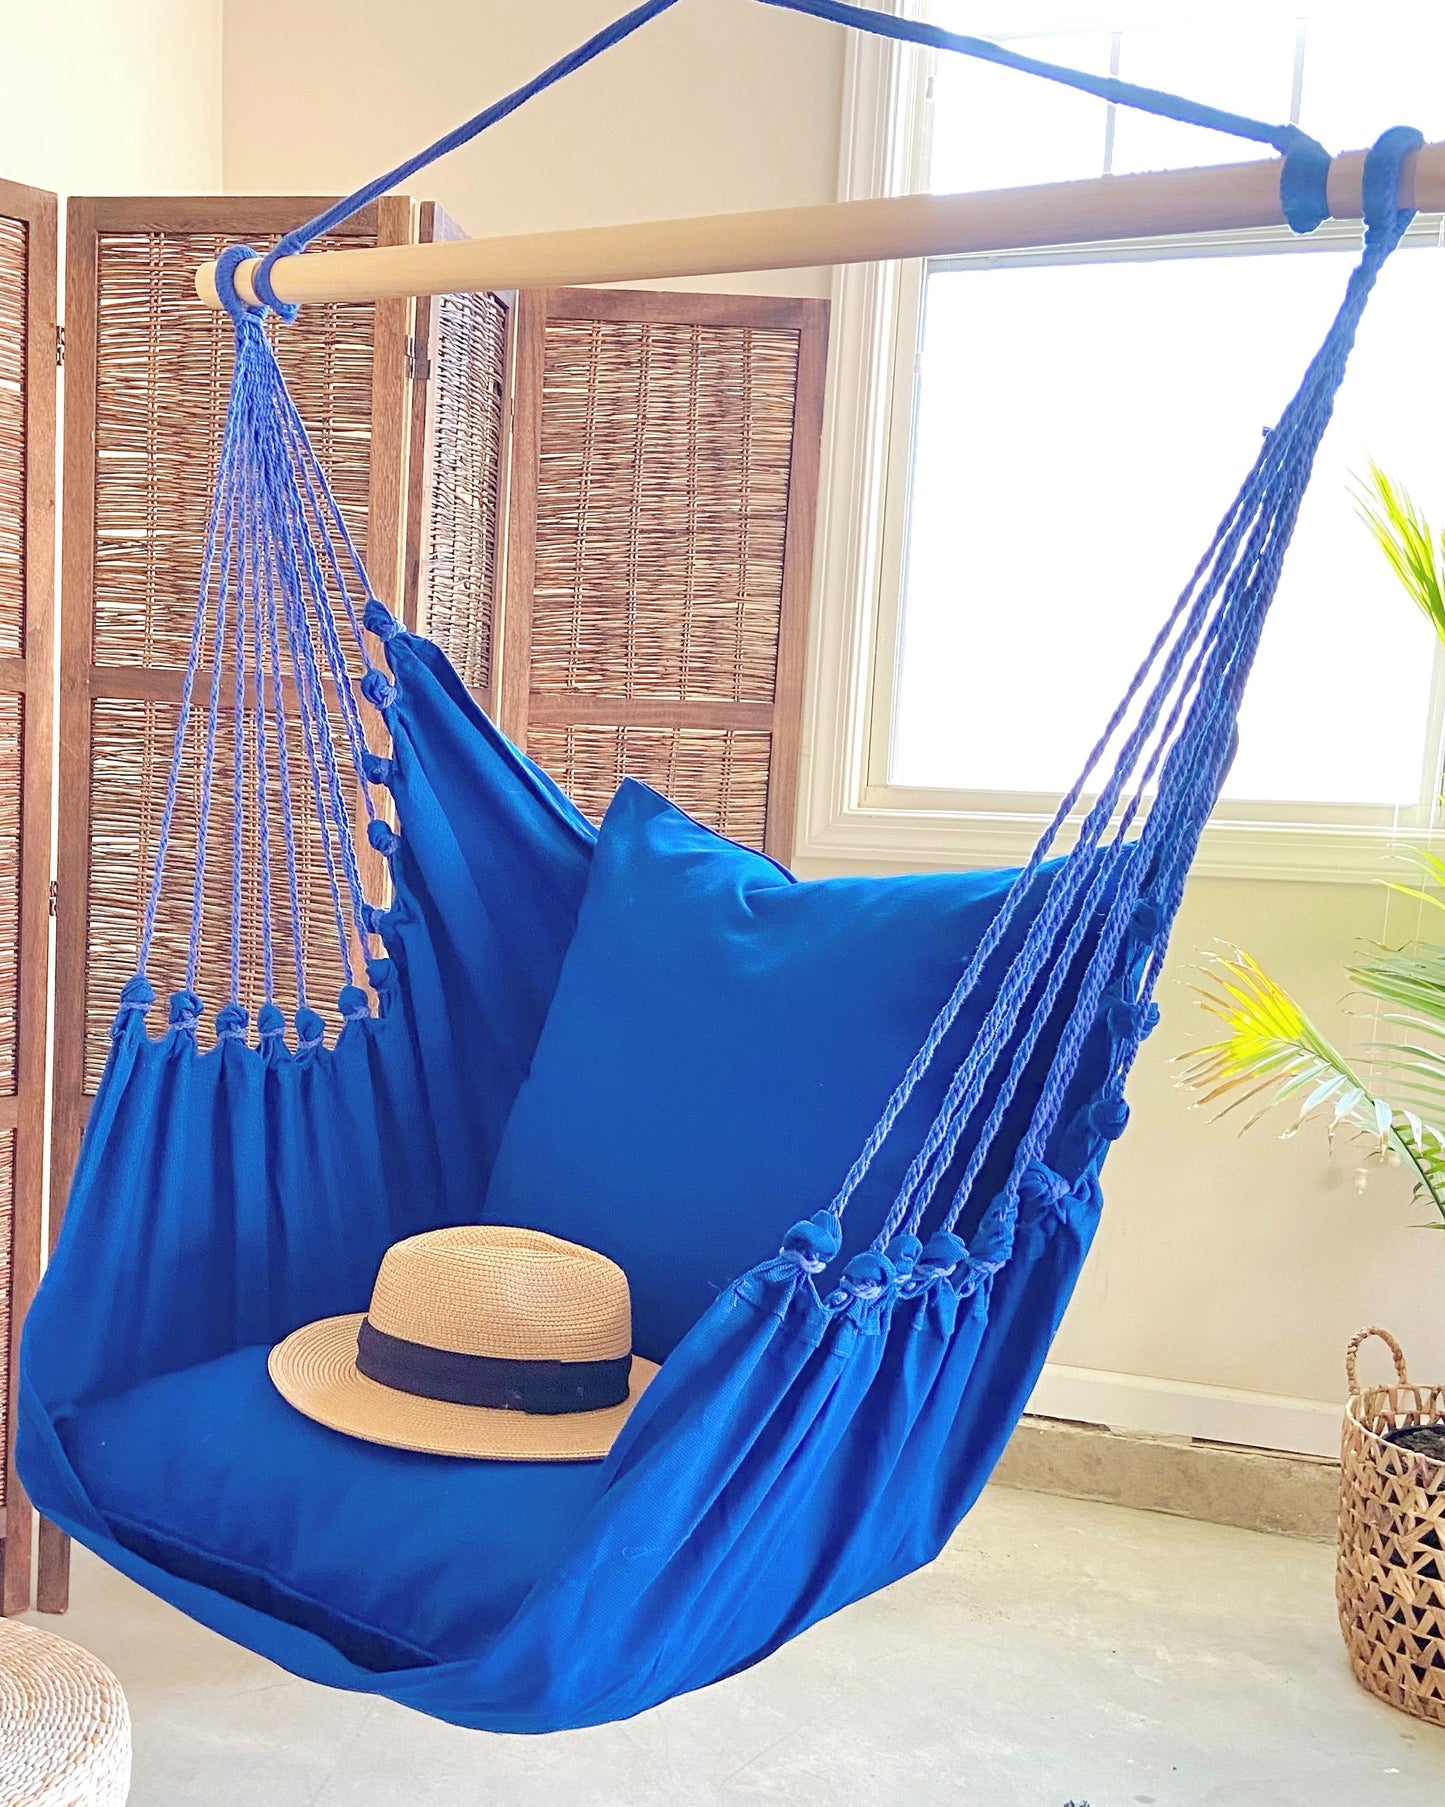 Blue Hanging Chair Hammock Swing with a hat